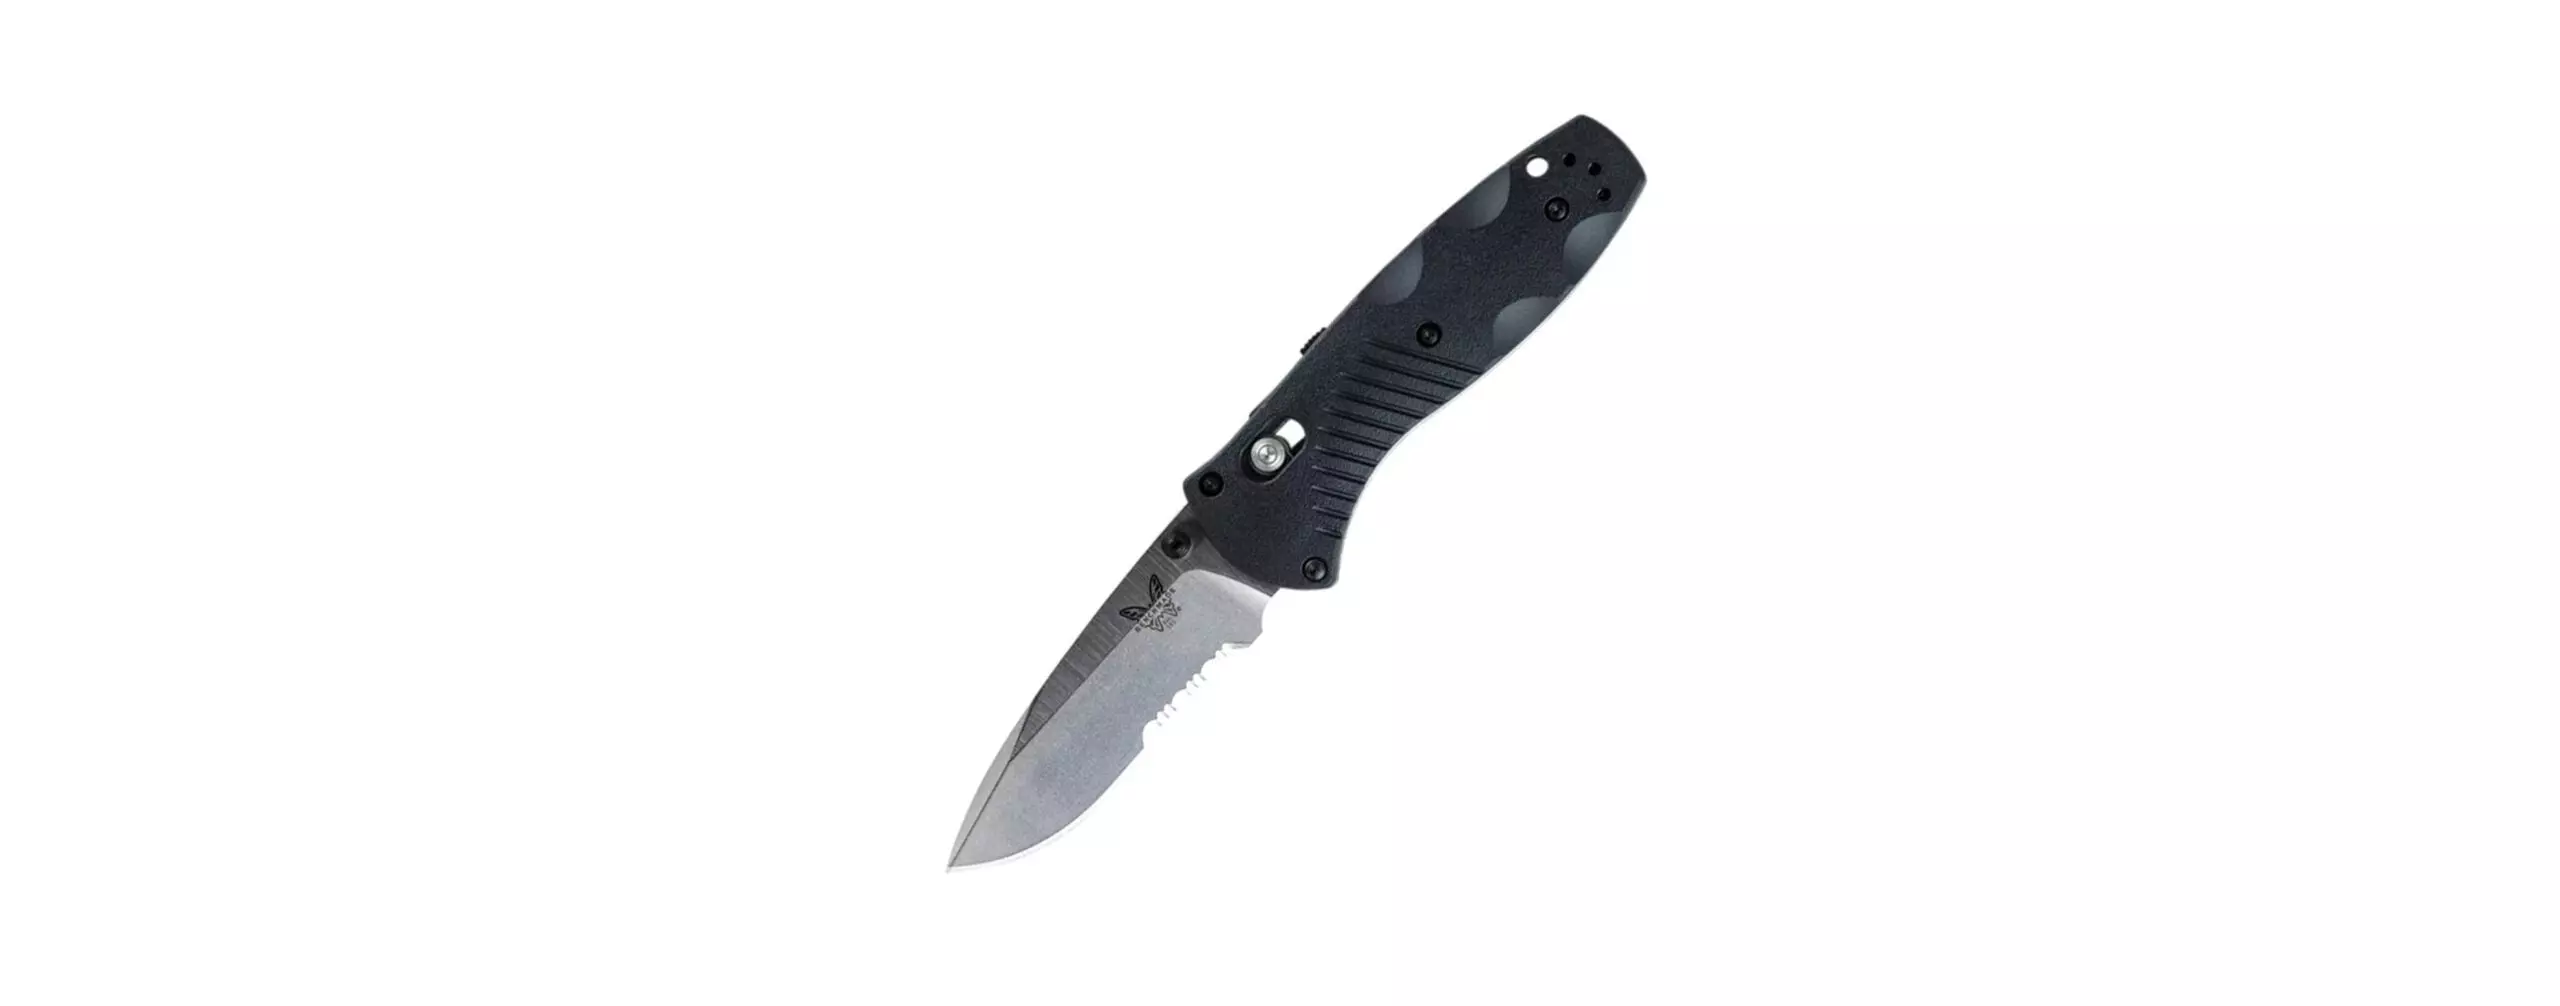 The Best Spring Assisted Knives (Review and Buying Guide) of 2022